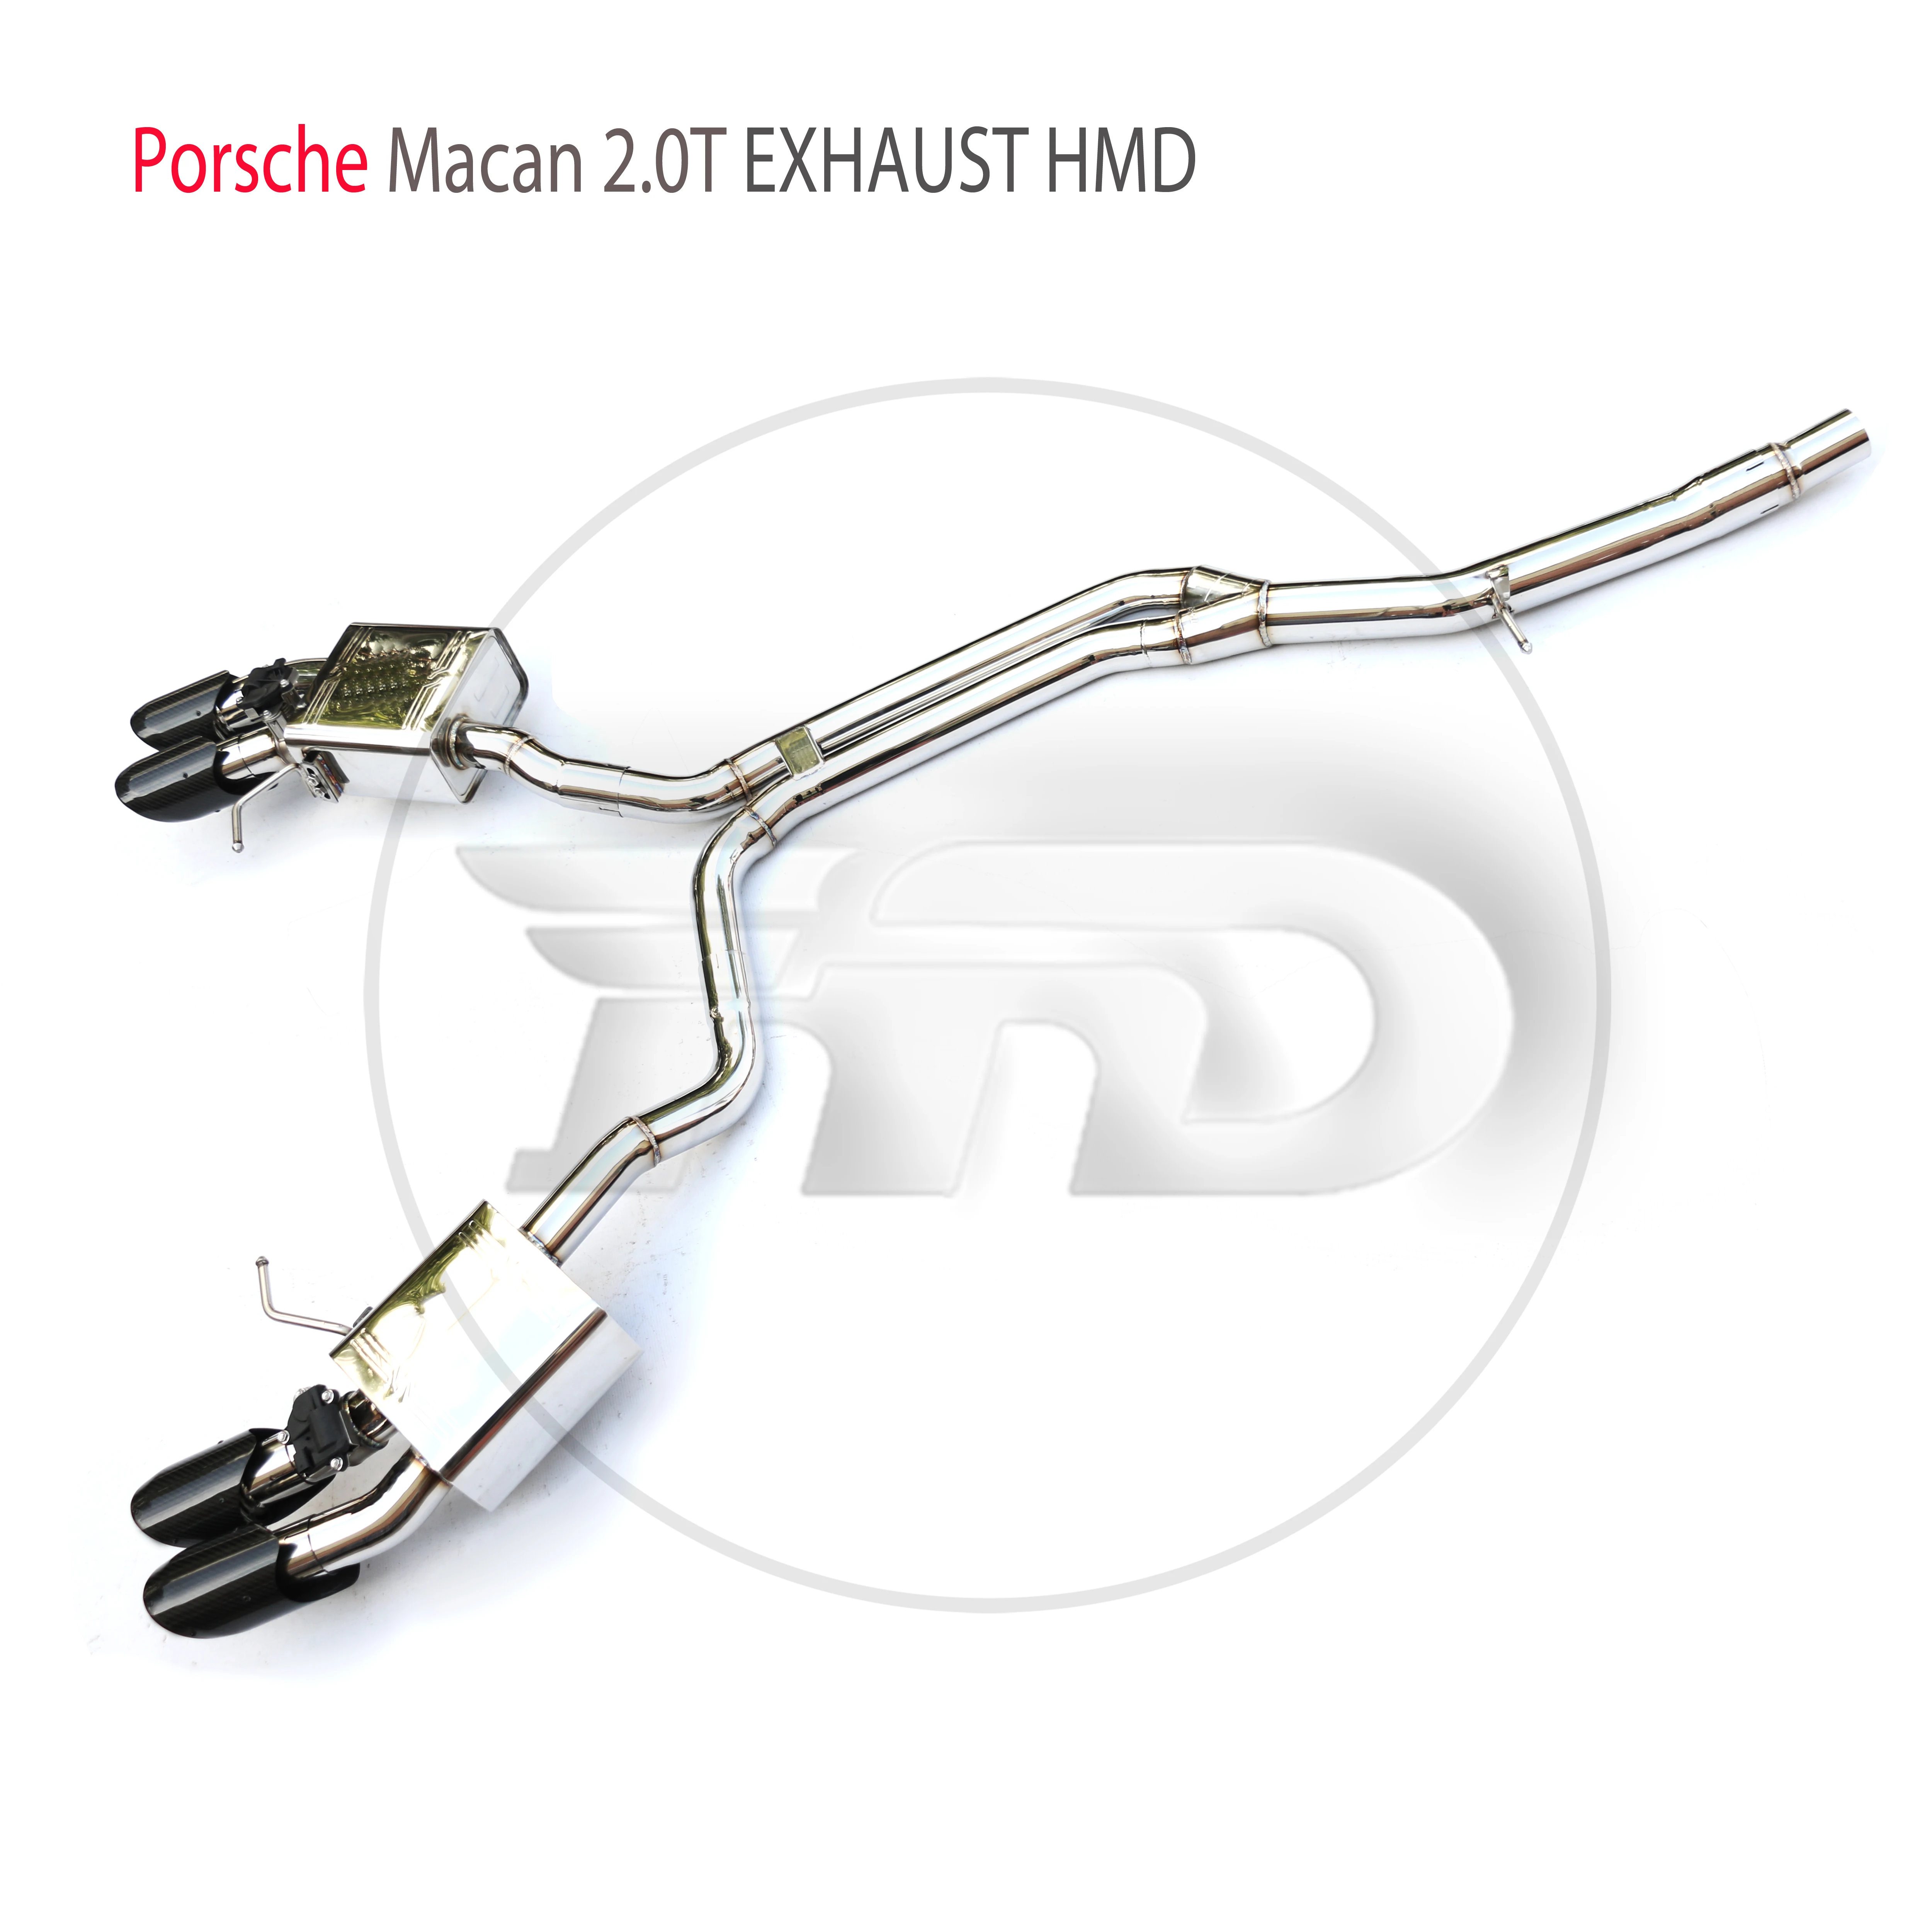 

HMD Stainless Steel Exhaust System Performance Catback is Suitable for Porsche Macan 2.0T Car Muffler